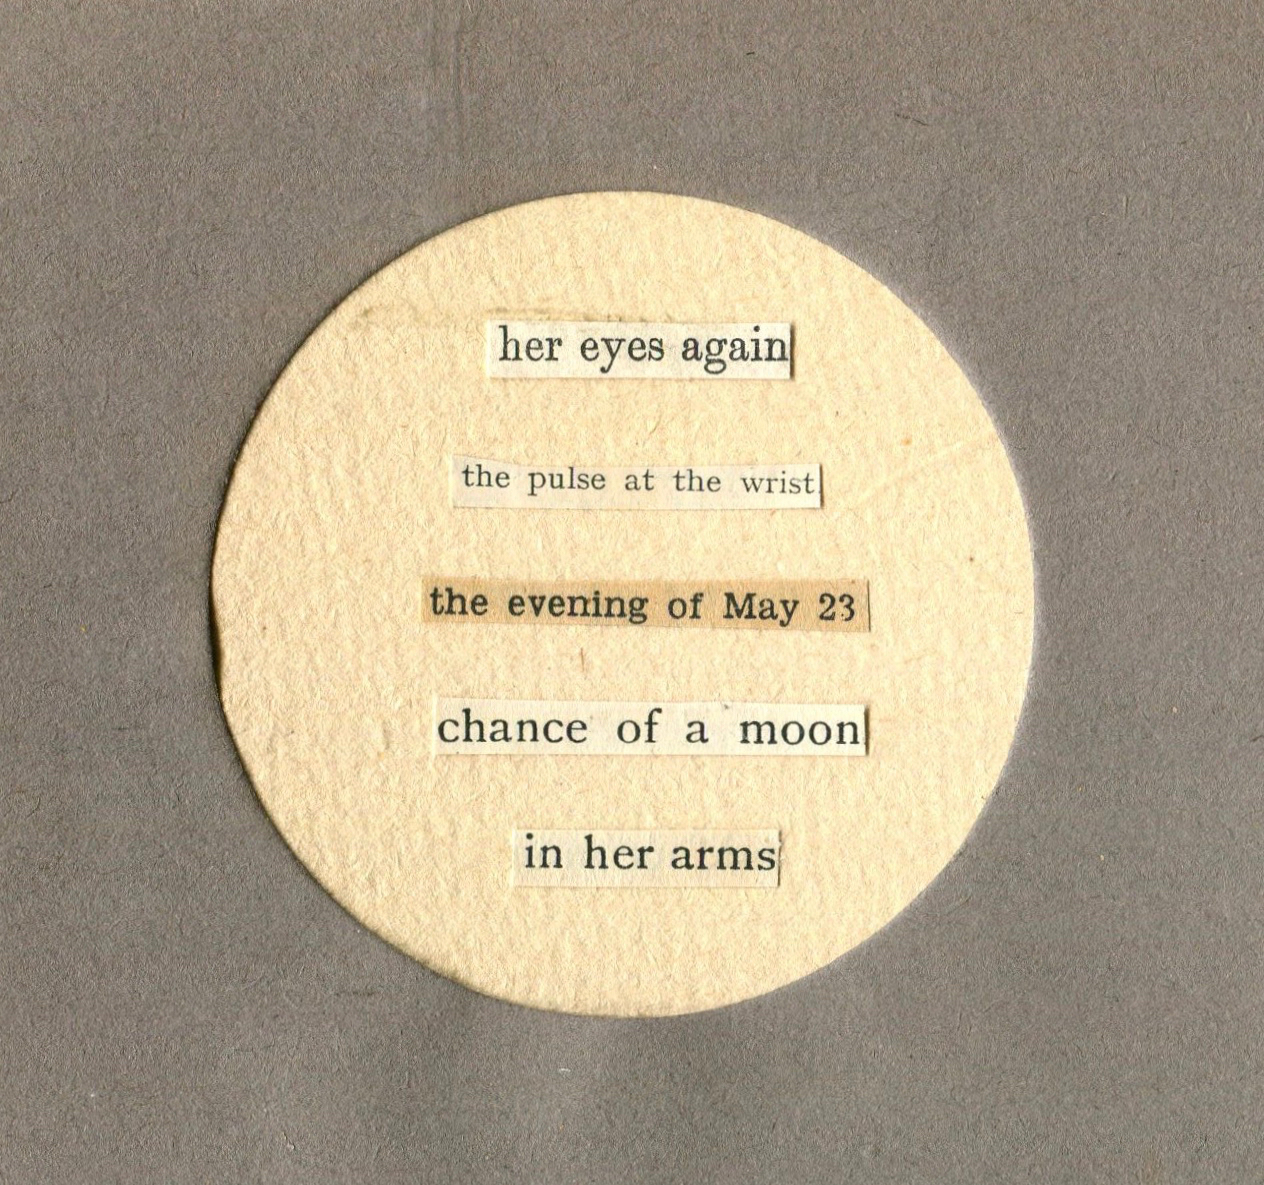 collage poem in a circle frame with words that say her eyes again the pulse at the wrist
        			the evening of may 23 chance of a moon in her arms